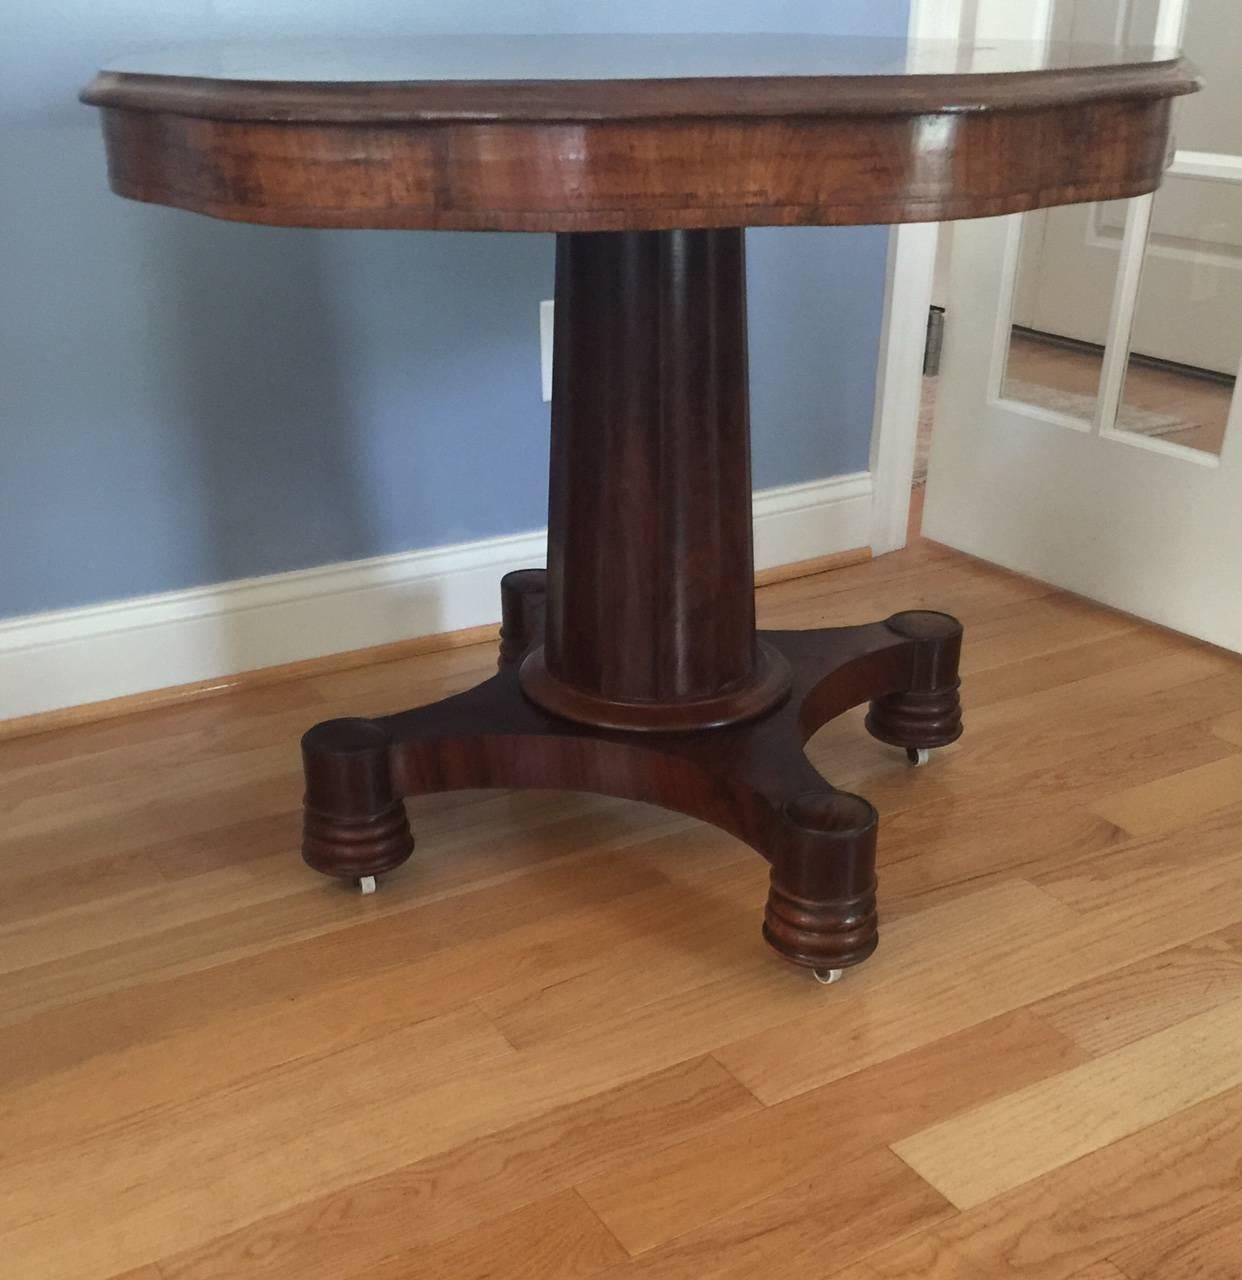 This handsome English piece has a flame mahogany top with beveled scalloped edge and apron. The pedestal is fluted. The base has a spool foot (and is set on wheels) with four legs. Although without markings, this piece is probably English Regency,